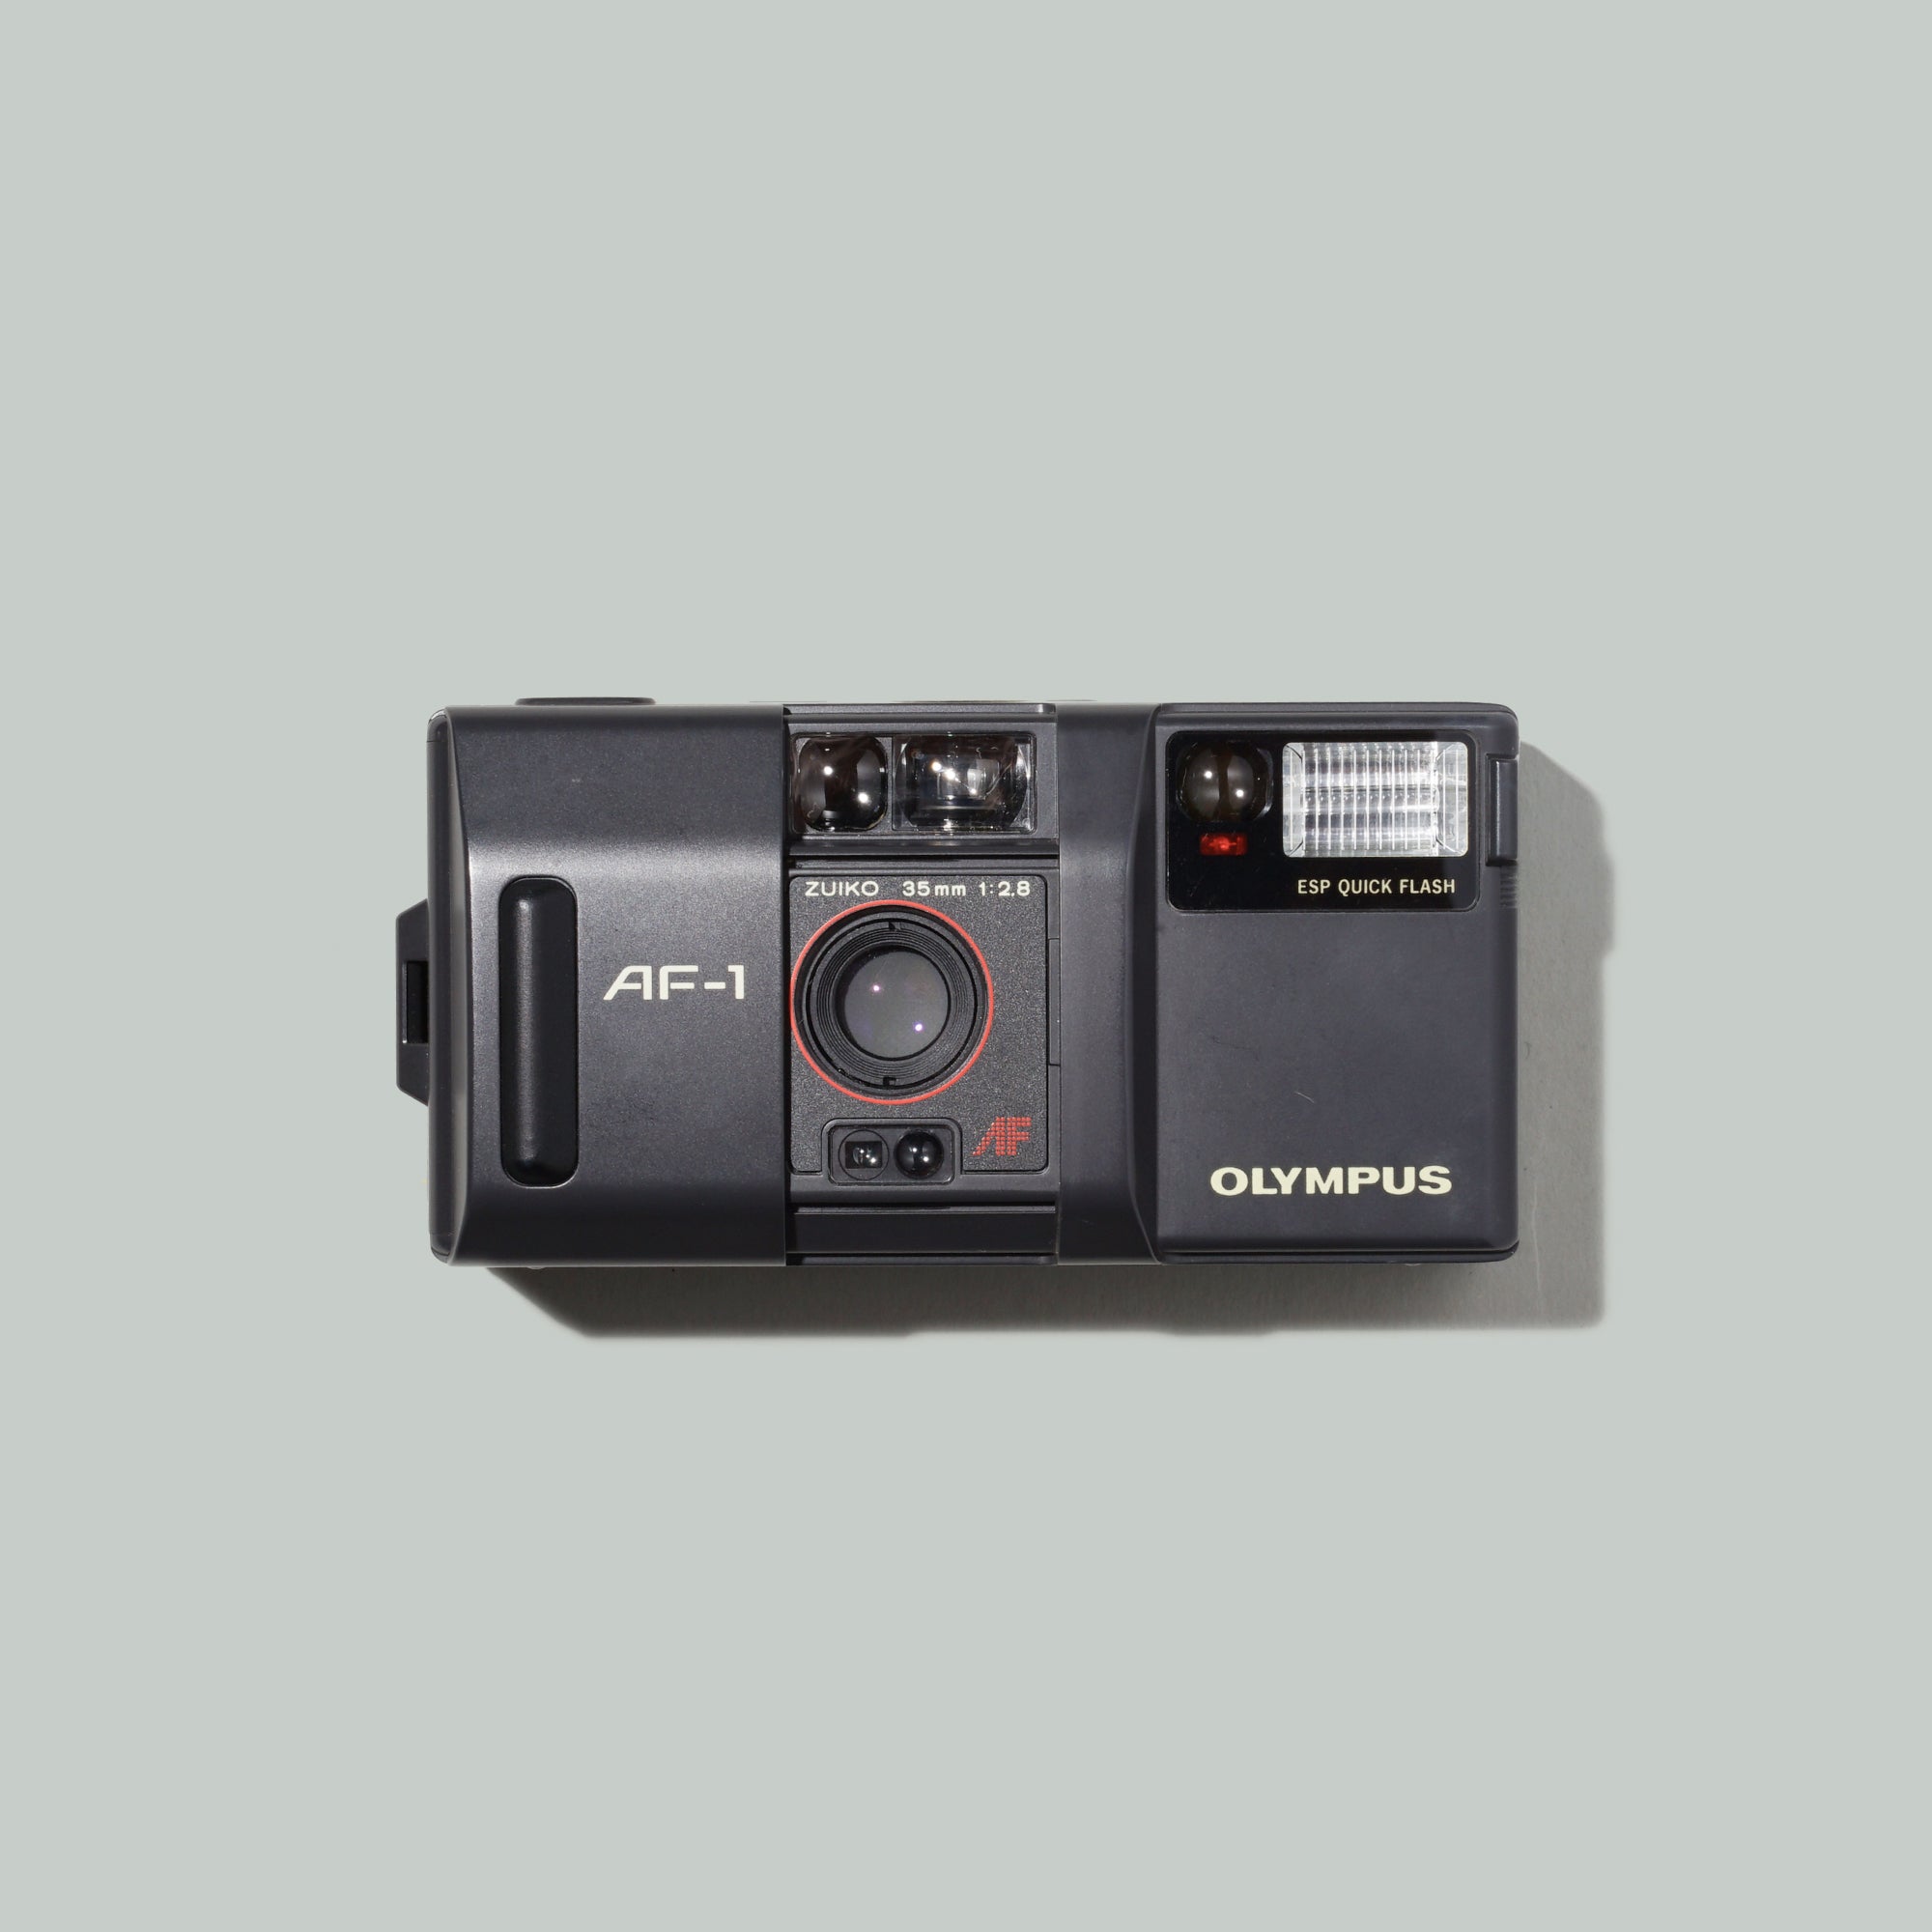 Buy Olympus AF-1 now at Analogue Amsterdam